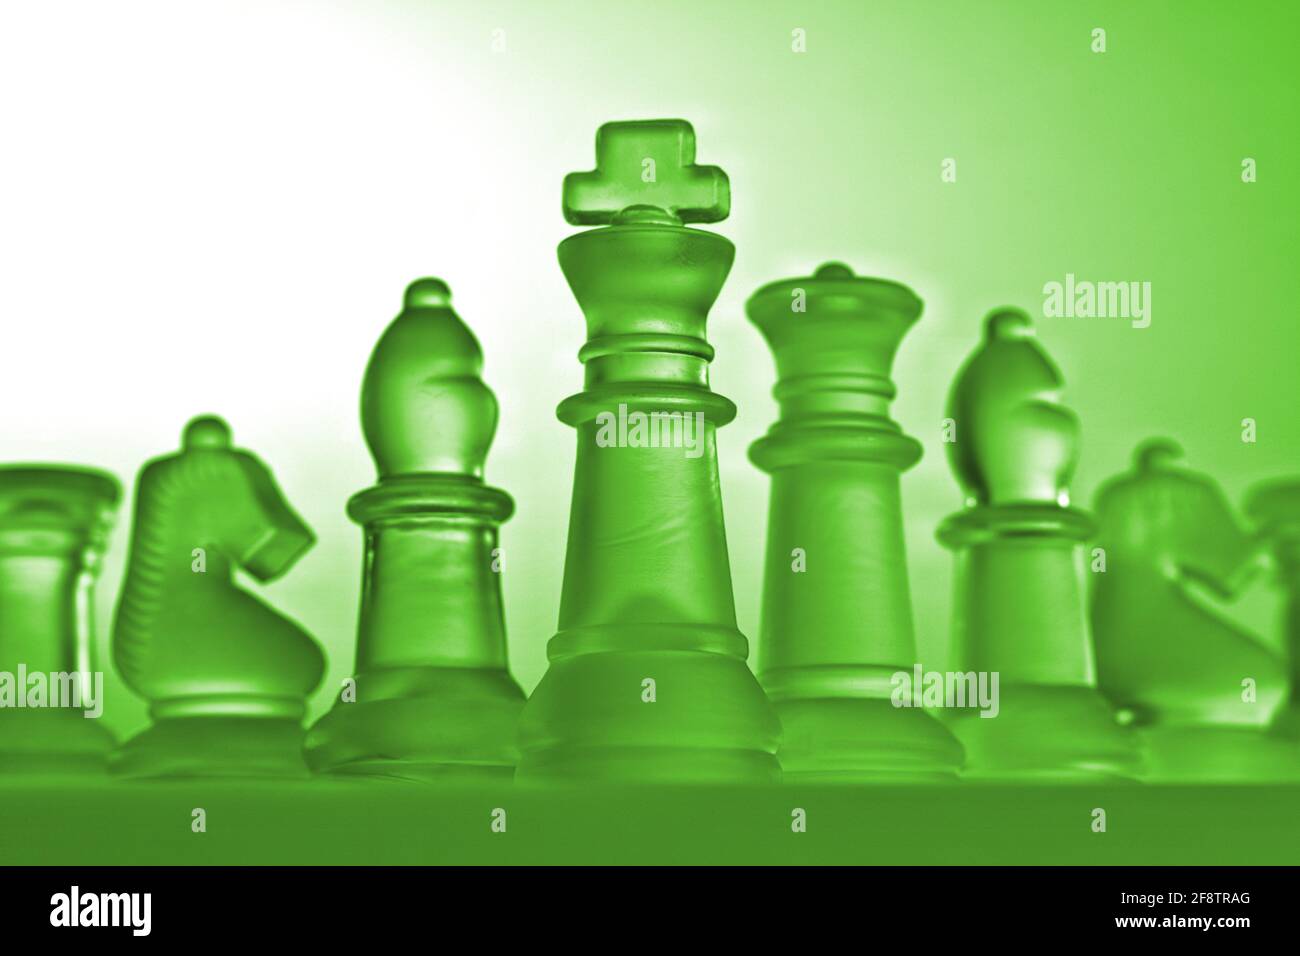 Deutschland. 11th Apr, 2021. Symbolic chess pieces of a chess game made of  glass with a neutral background. Detail of some white figures with a green  light mood from a slight frog's